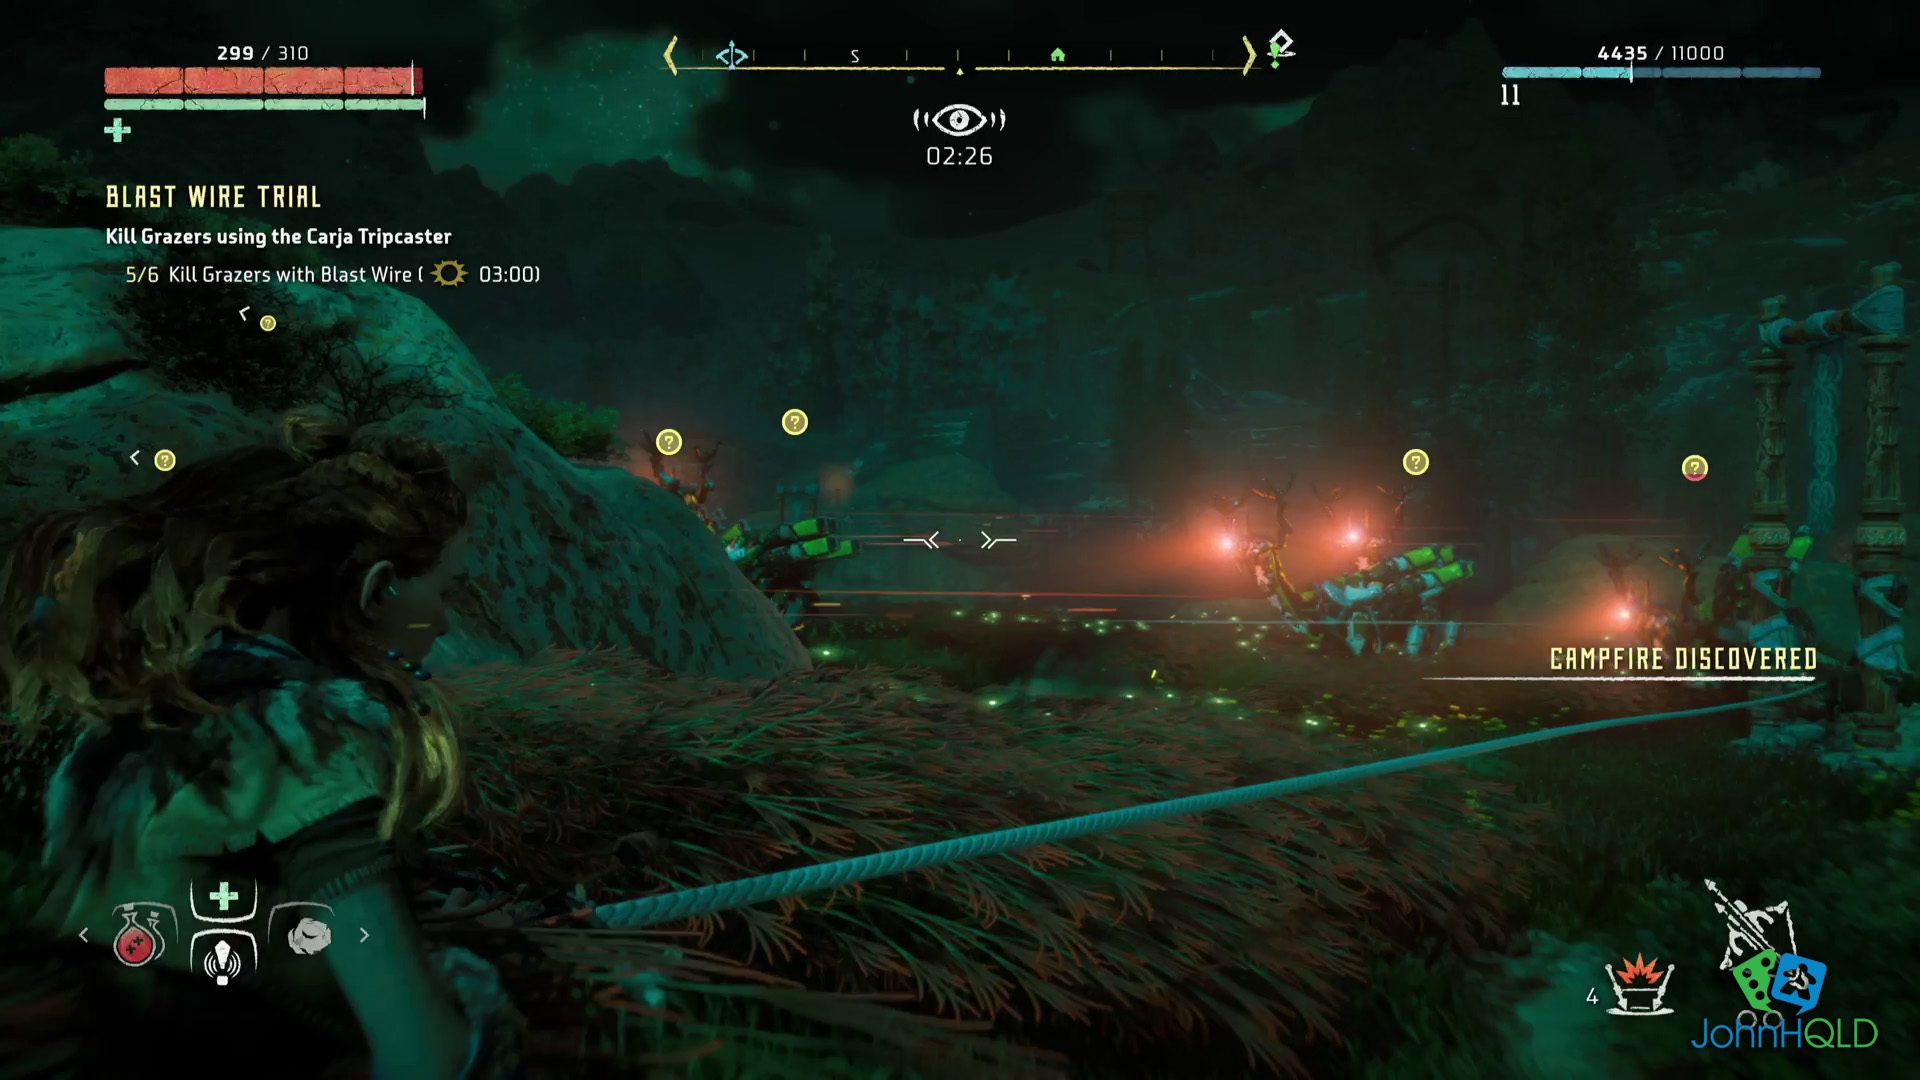 20220207 - Horizon Zero Dawn - Hunting Ground Trials are a fun way to learn your weapons